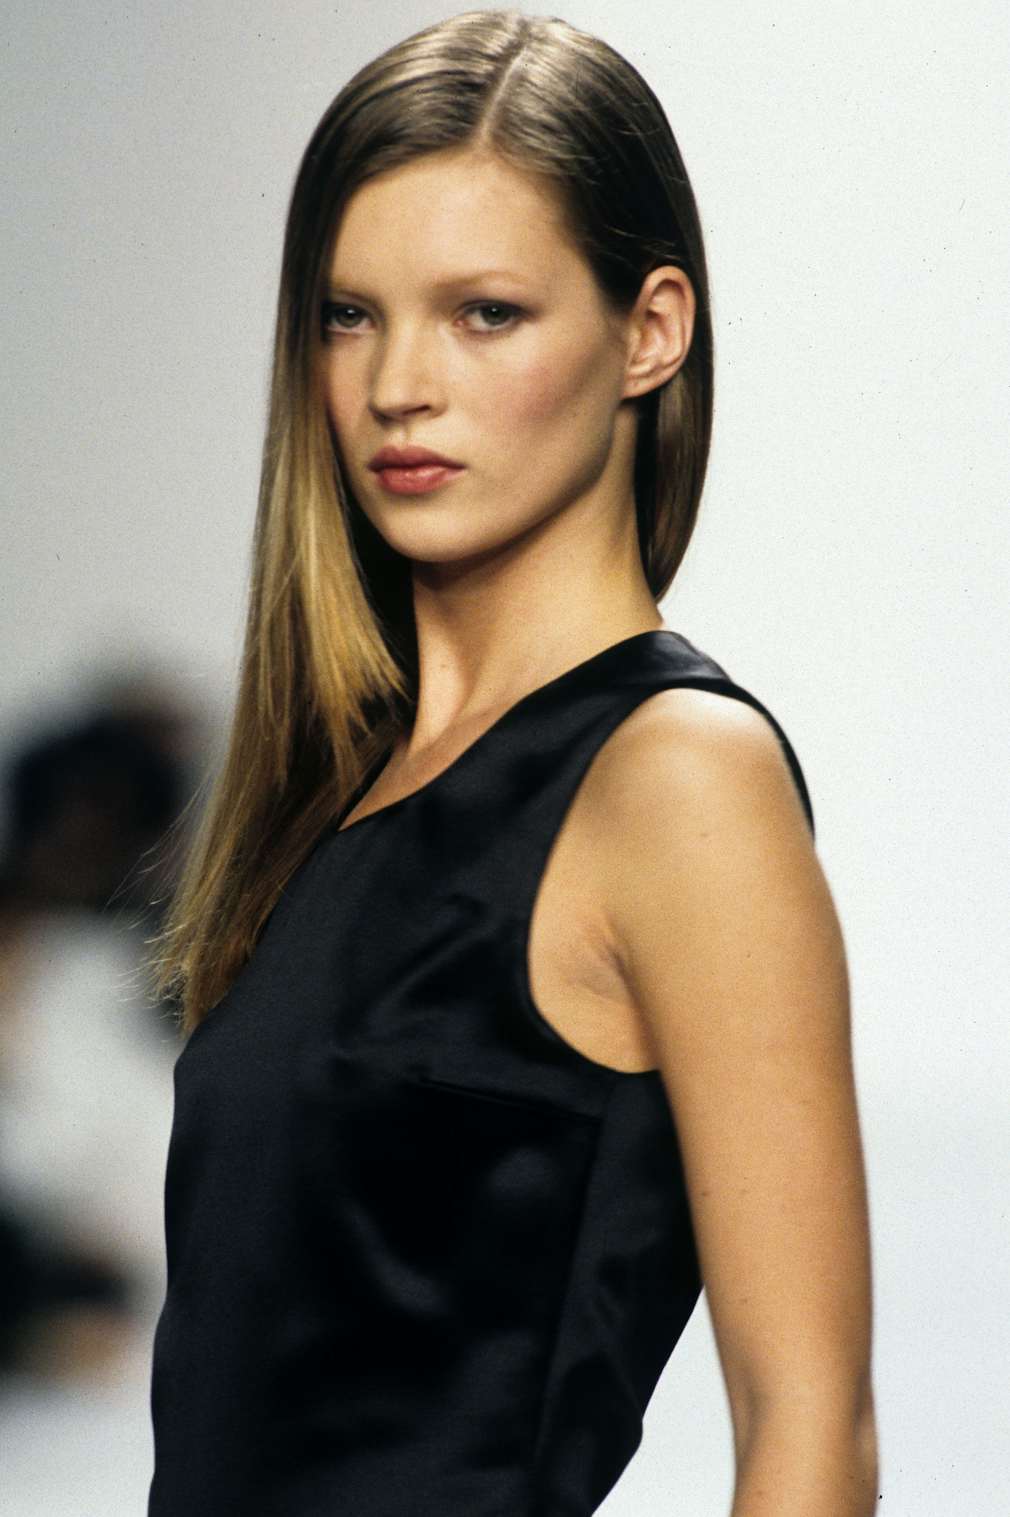 Kate Moss Just Brought Back This '90s Hair Trend on the Louis Vuitton Runway